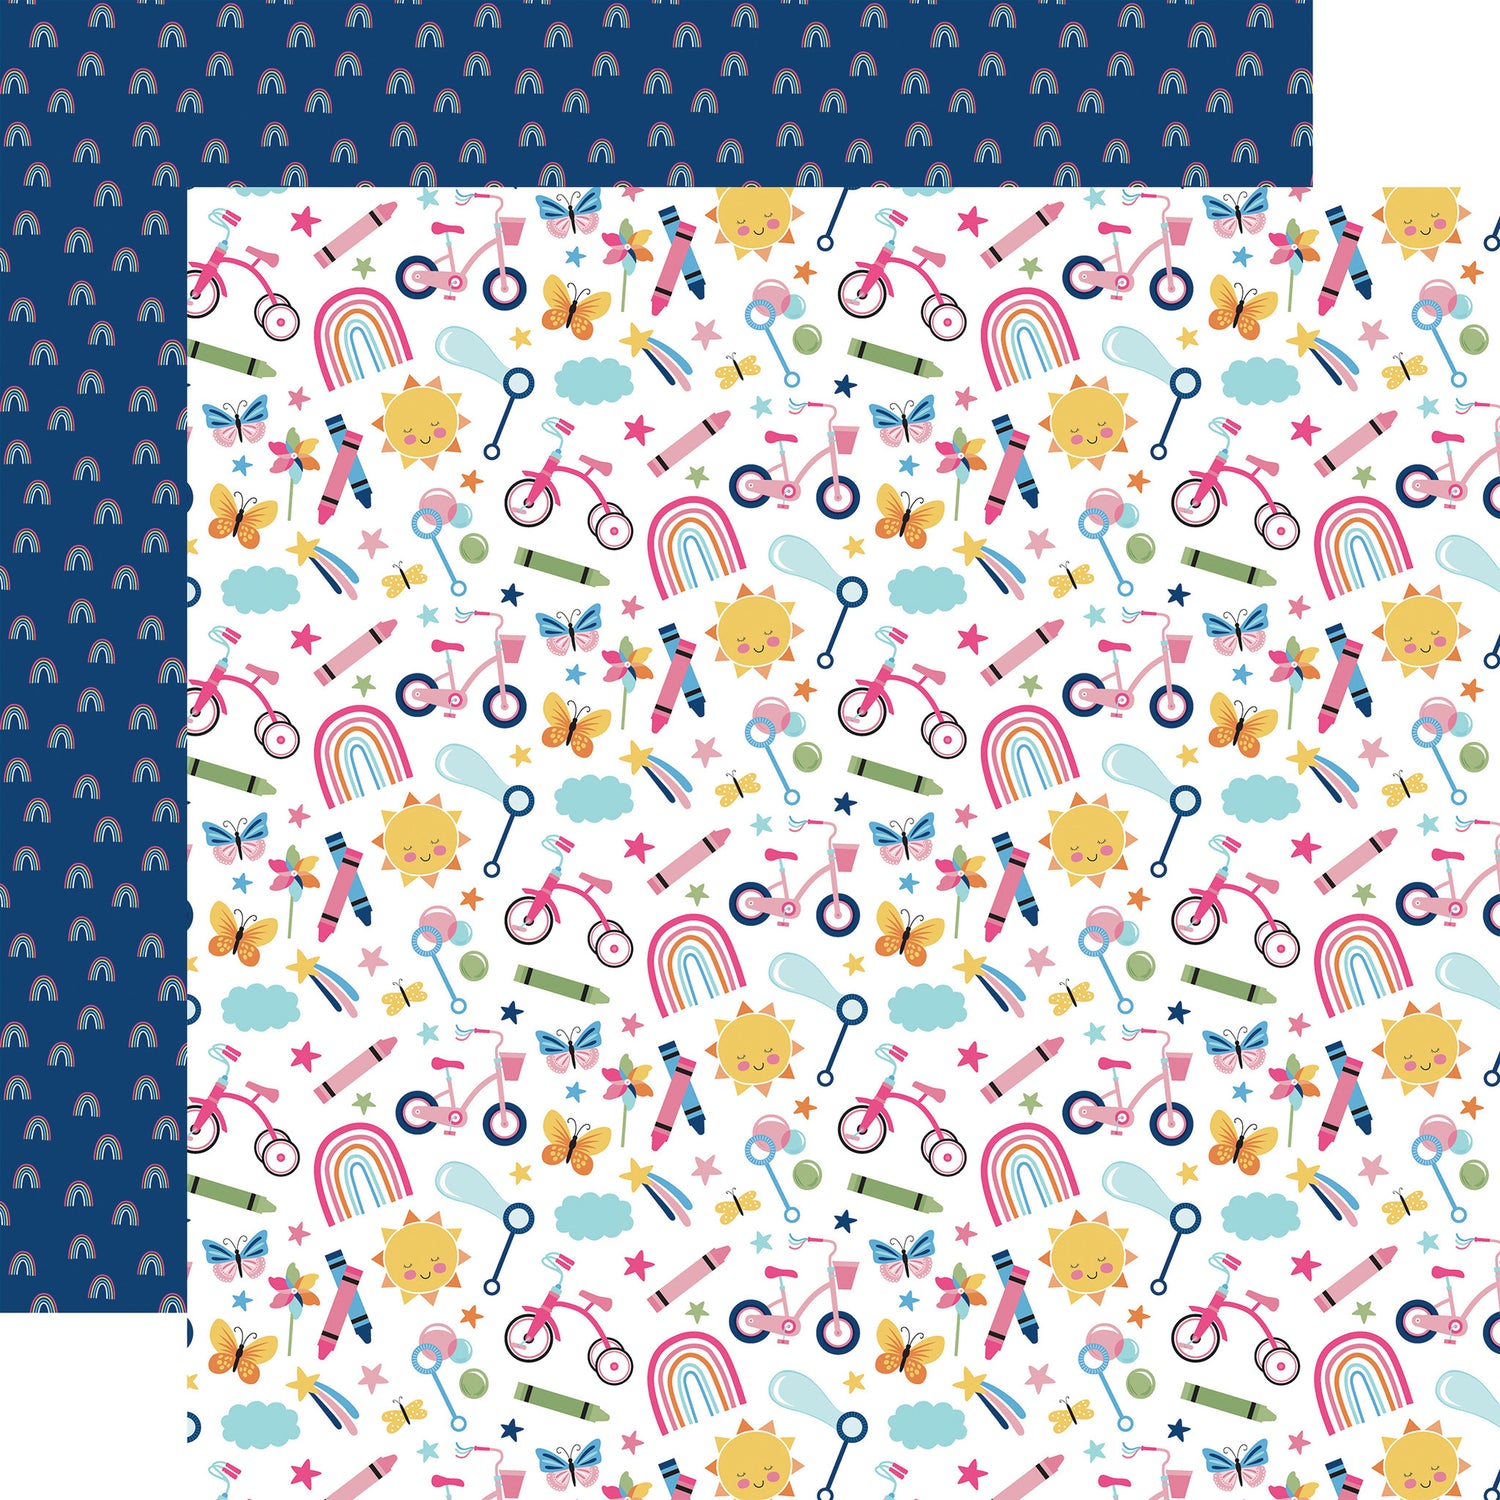 Echo Park PLAY ALL DAY GIRL 12”X12” Scrapbook Paper